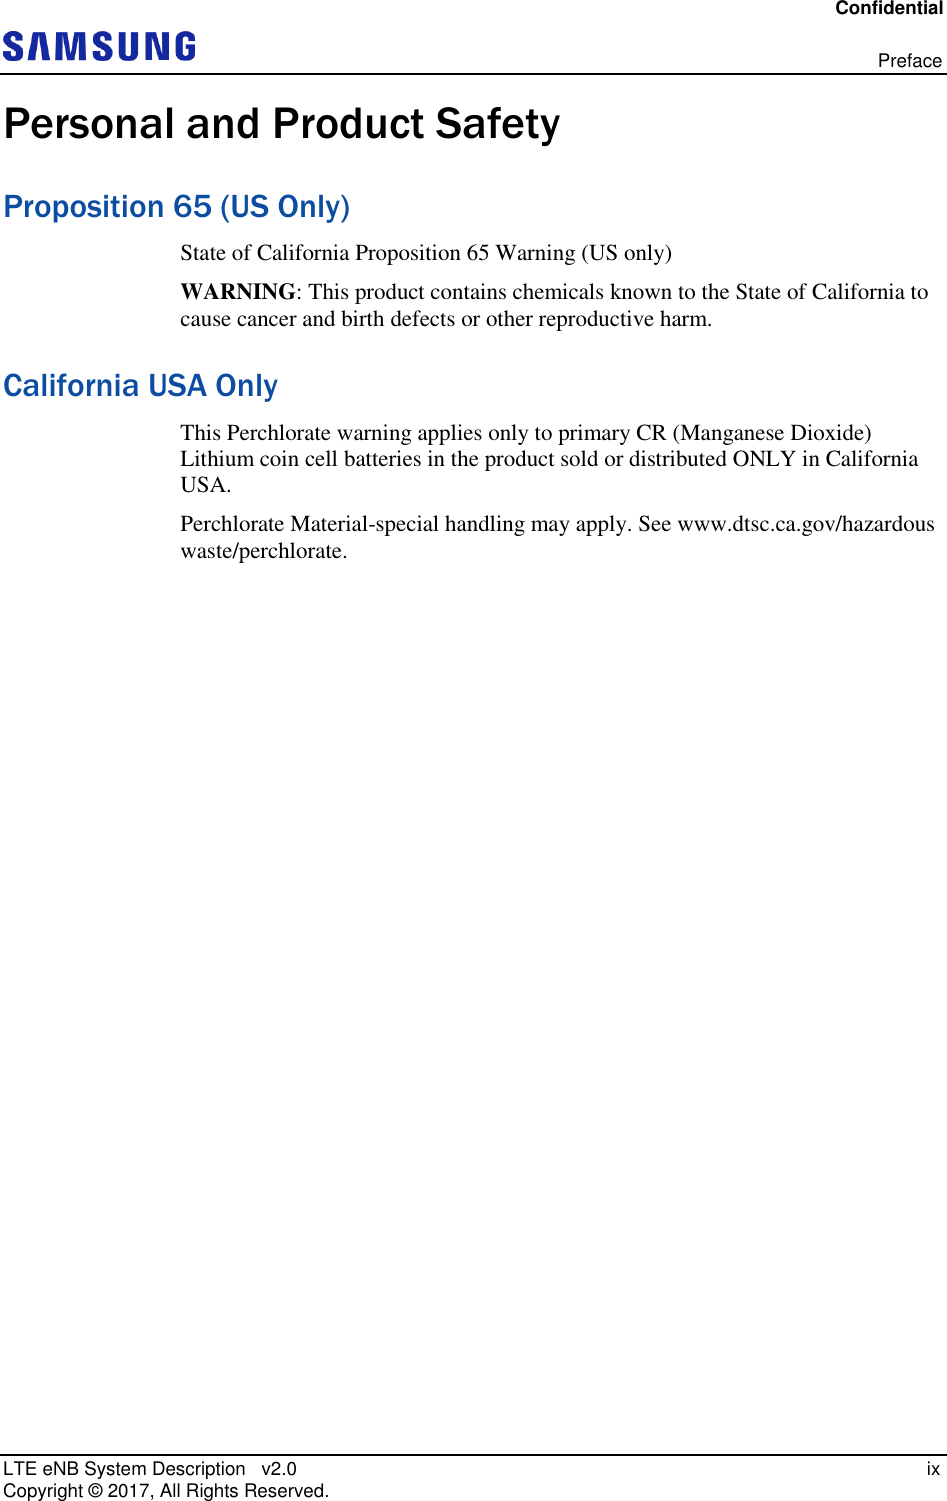 Confidential   Preface LTE eNB System Description   v2.0   ix Copyright ©  2017, All Rights Reserved. Personal and Product Safety Proposition 65 (US Only) State of California Proposition 65 Warning (US only)  WARNING: This product contains chemicals known to the State of California to cause cancer and birth defects or other reproductive harm. California USA Only This Perchlorate warning applies only to primary CR (Manganese Dioxide) Lithium coin cell batteries in the product sold or distributed ONLY in California USA. Perchlorate Material-special handling may apply. See www.dtsc.ca.gov/hazardous waste/perchlorate.  